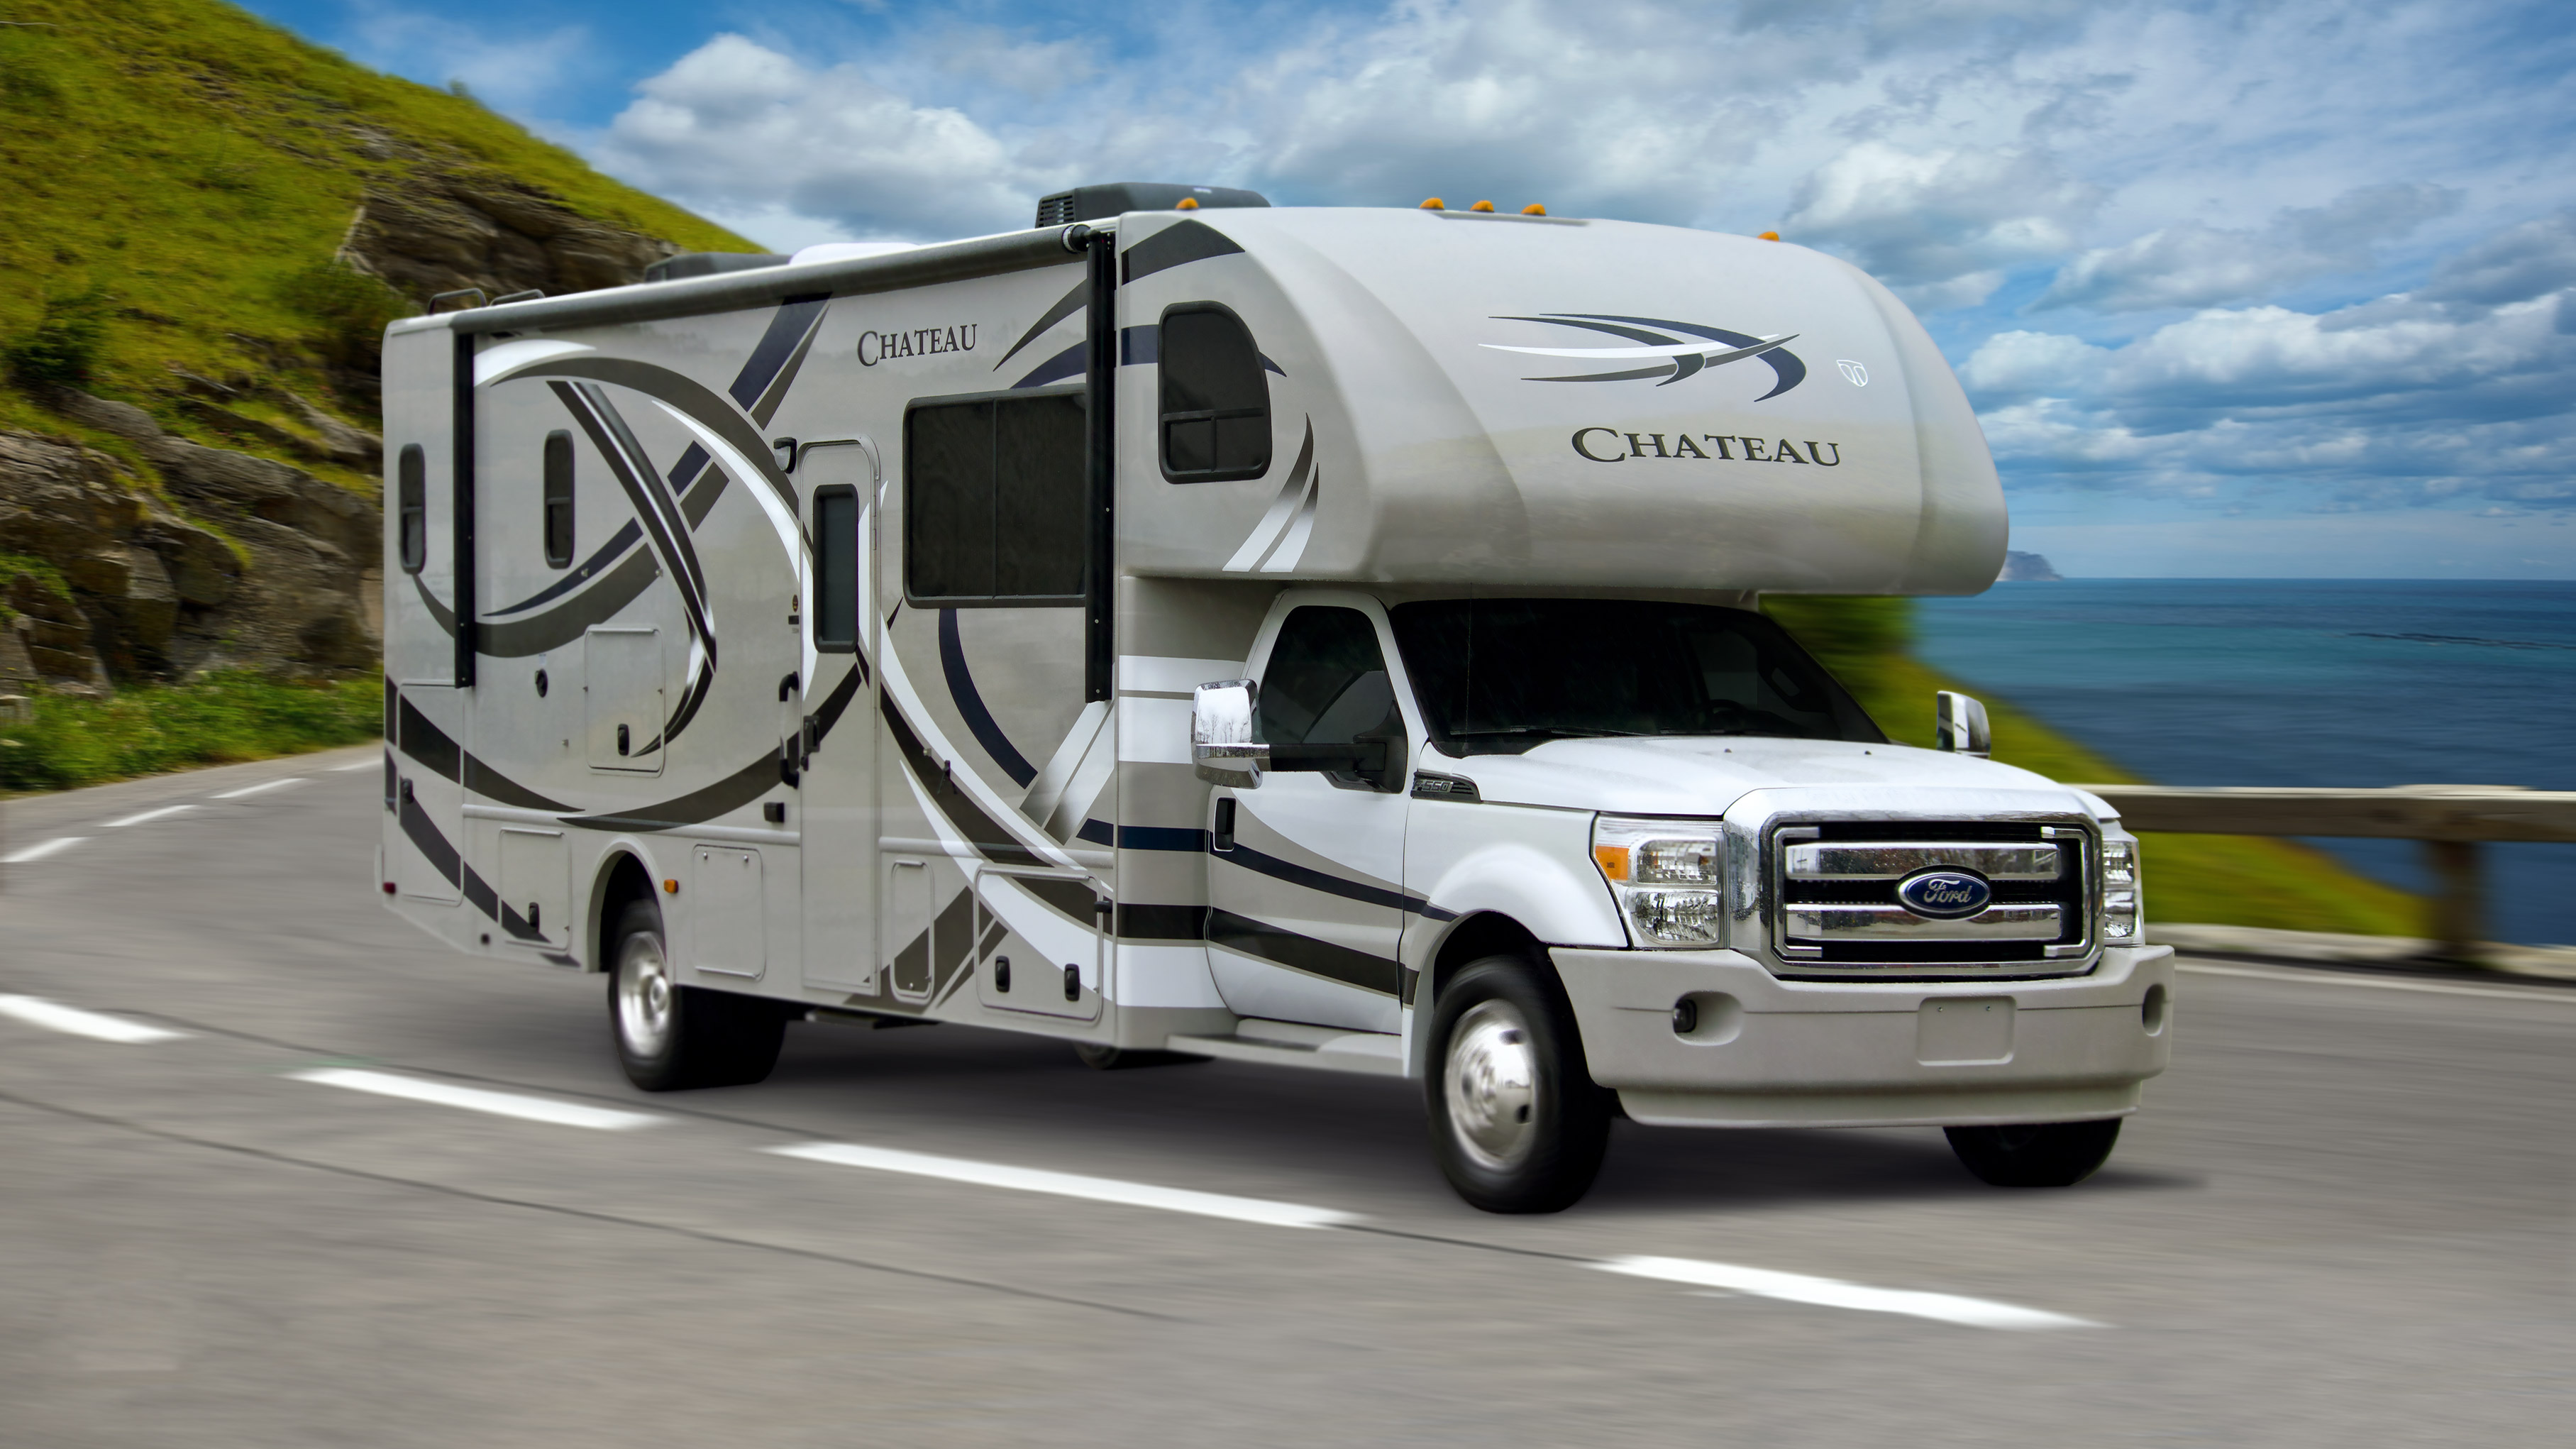 RV on road to represent a charge of RV battery while driving